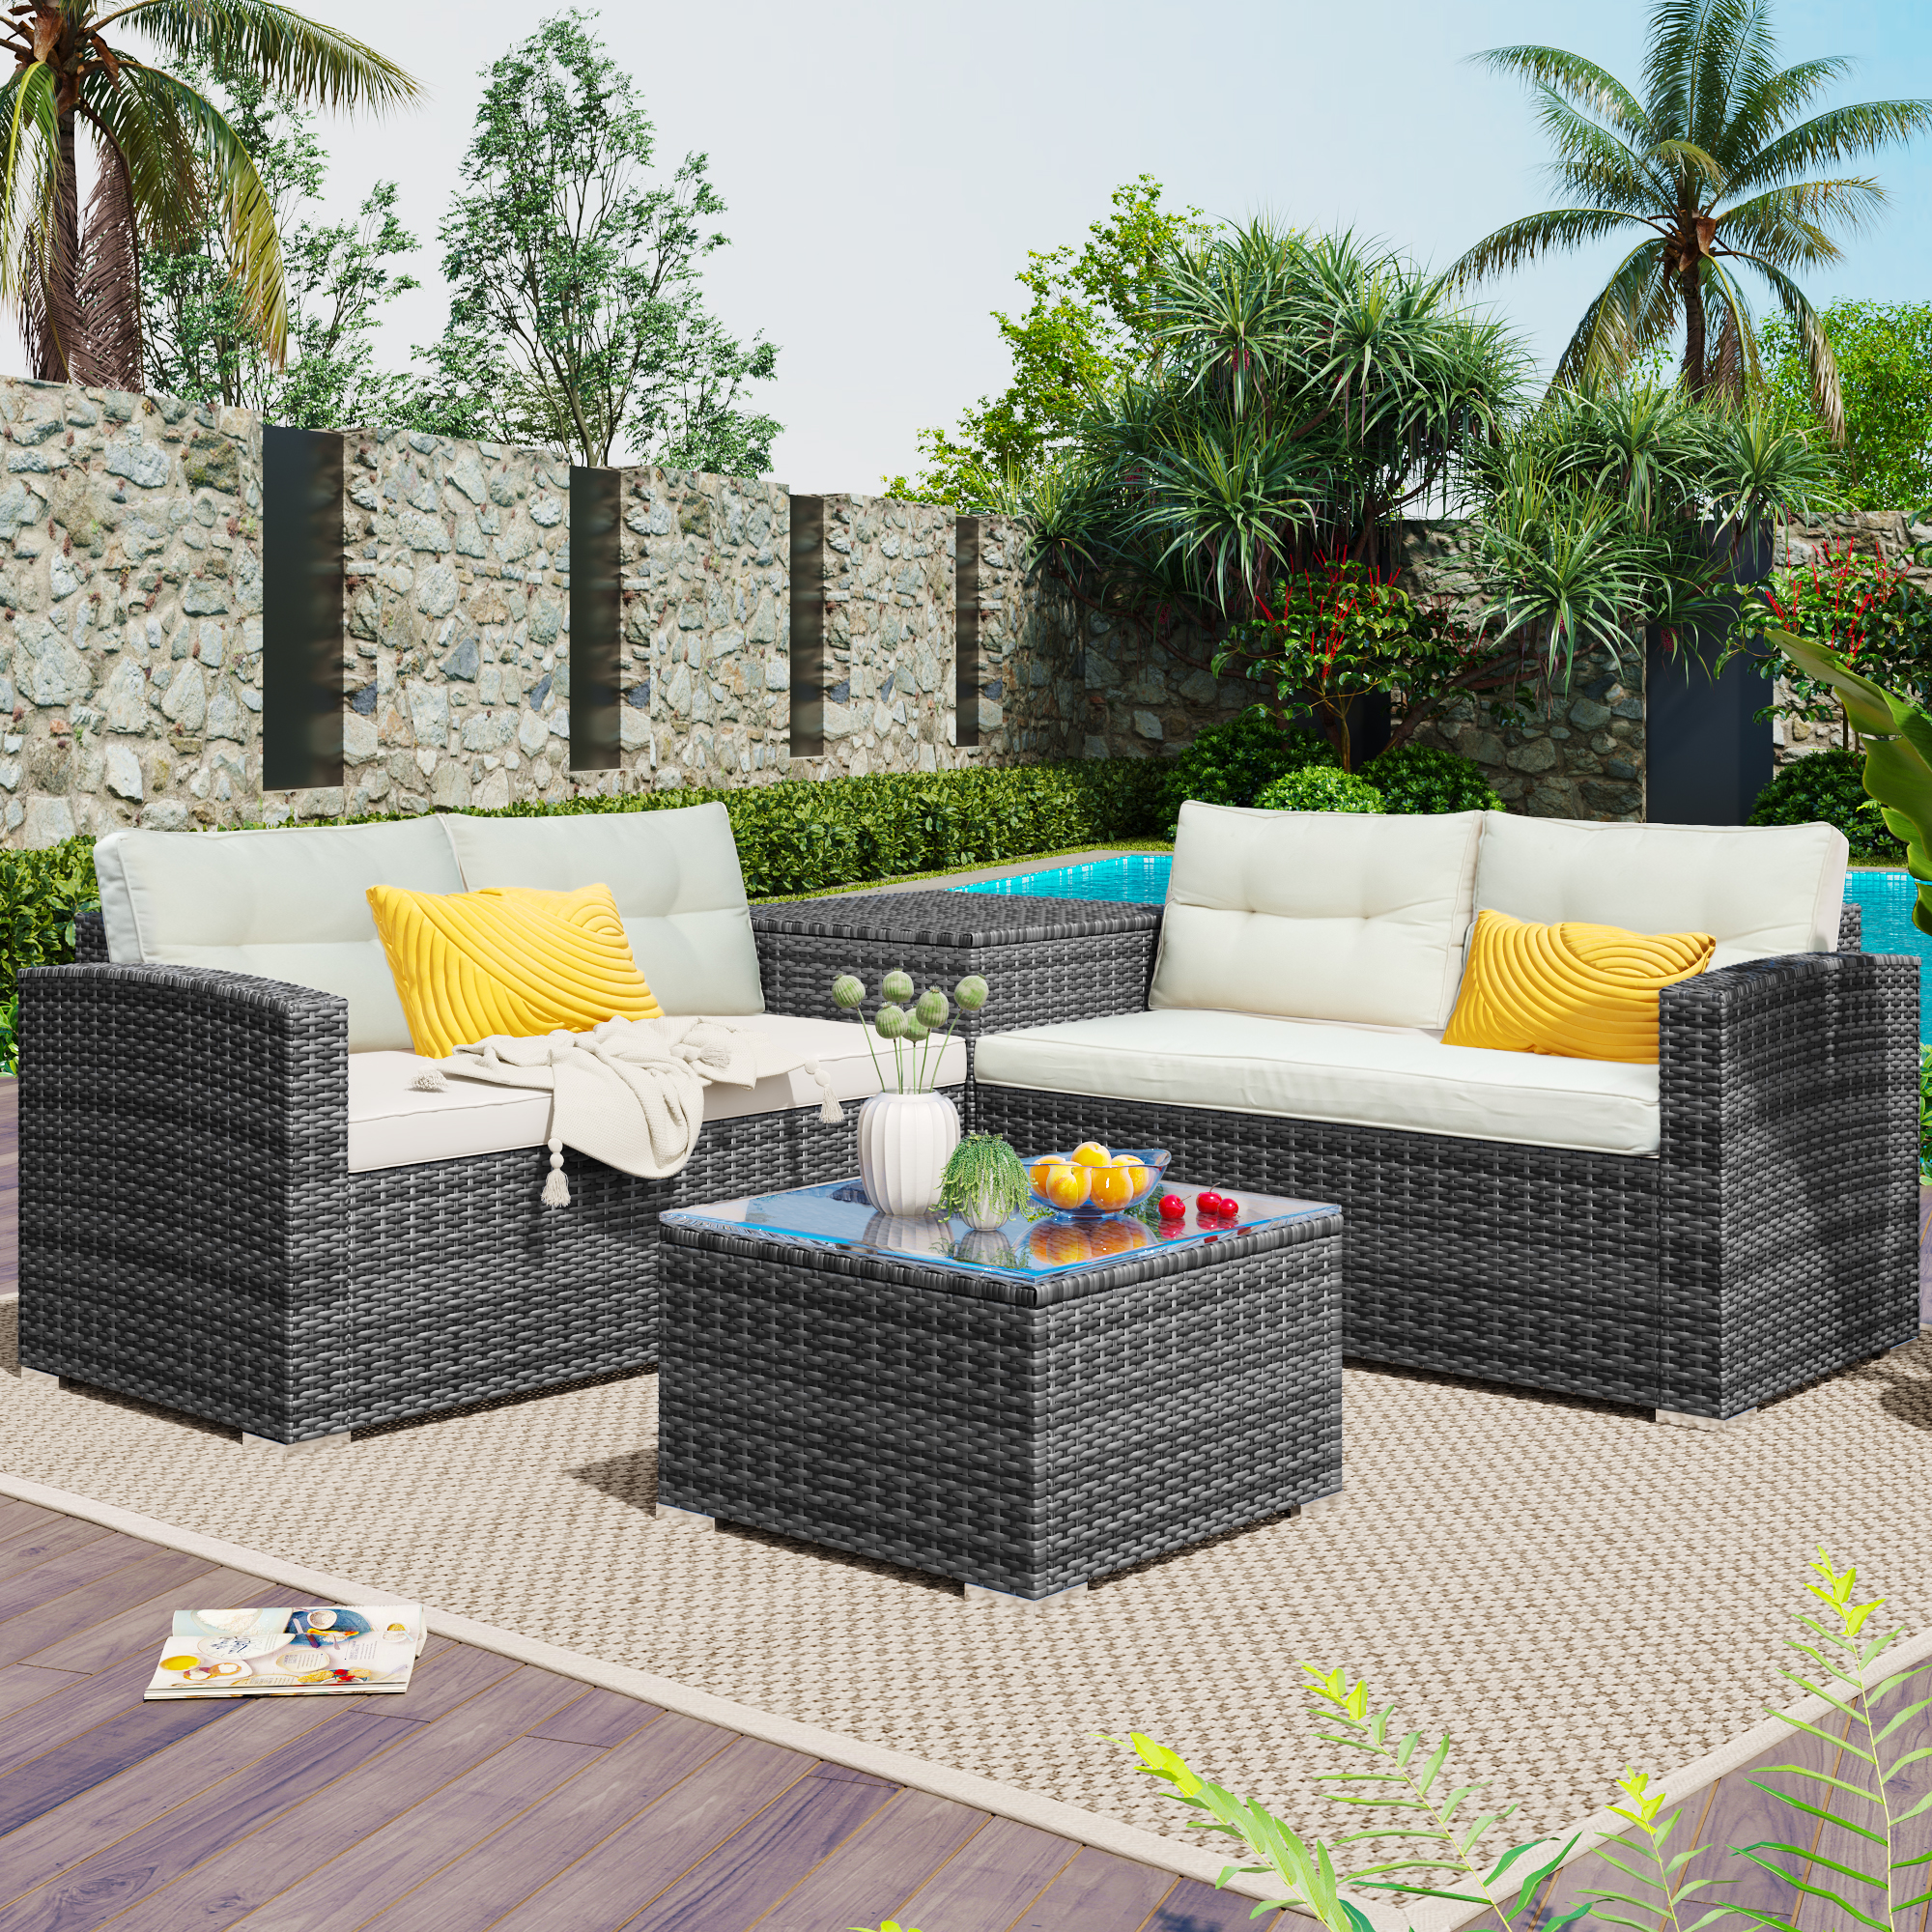 Outdoor Patio Chairs & Seating Sets Furniture for Outdoor Patio, 4-Piece Wicker Conversation Set w/L-Seats Sofa, R-Seats Sofa, Cushion box, Tempered Glass Dining Table, Padded Cushions, S9156 - image 1 of 10